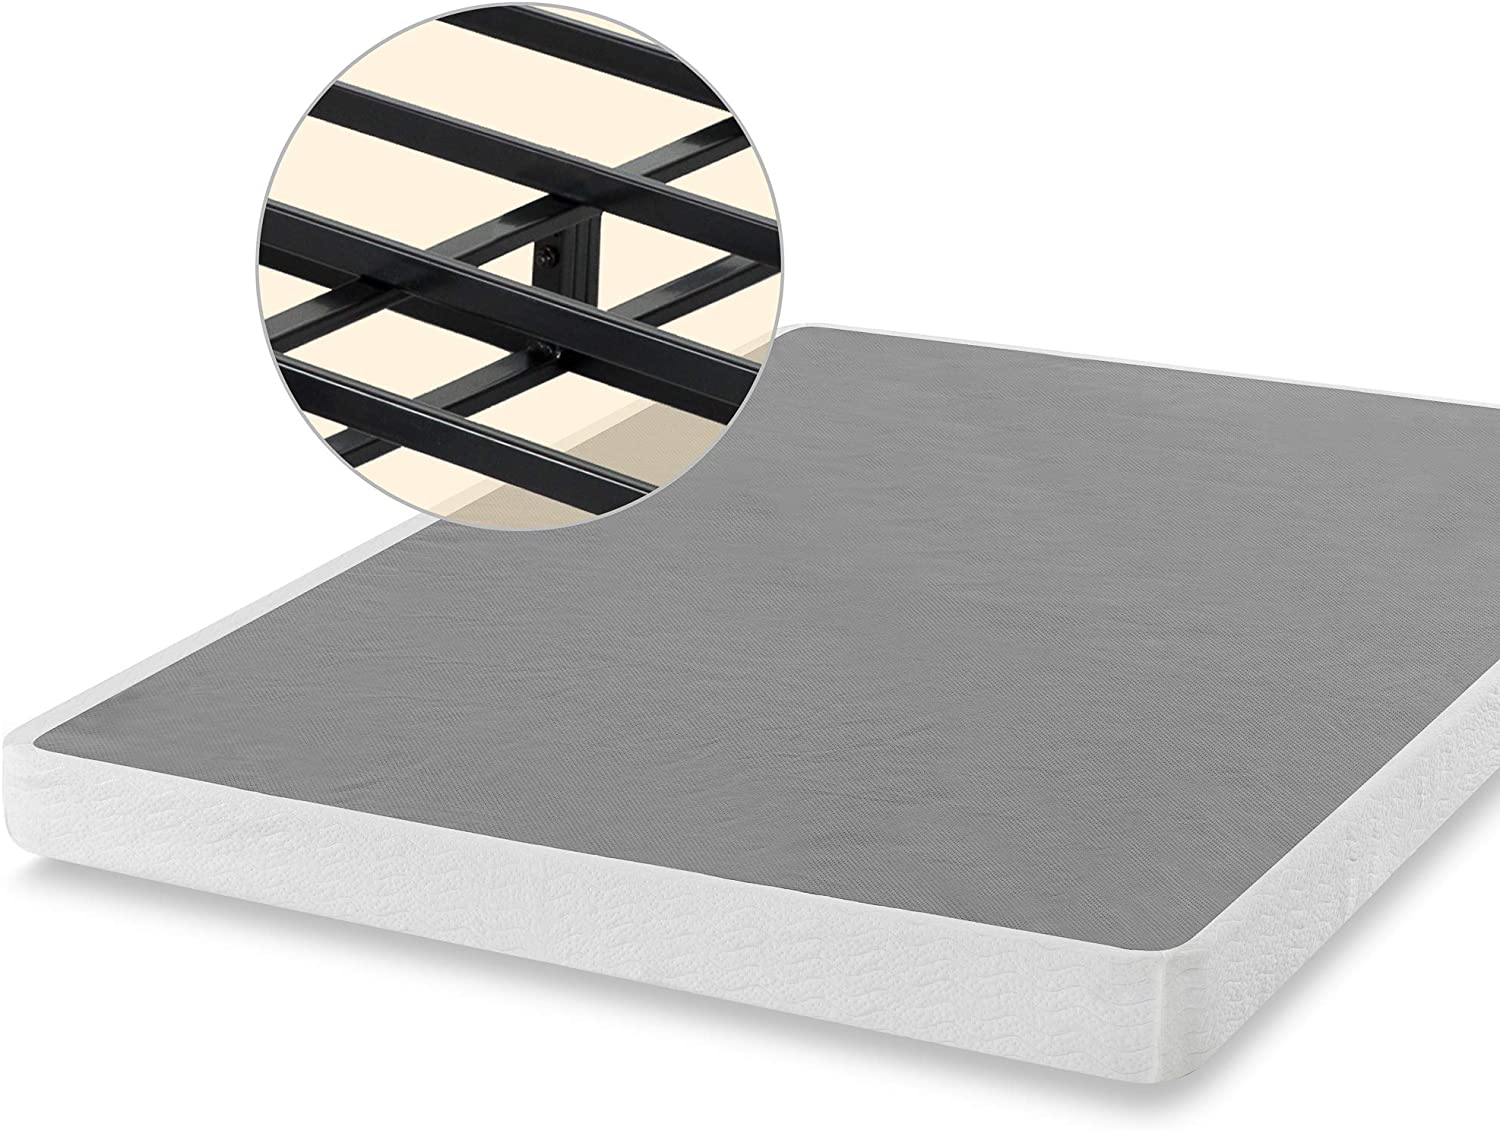 ZINUS 5 Inch Metal Smart Box Spring / Mattress Foundation / Strong Metal Frame / Easy Assembly, Full